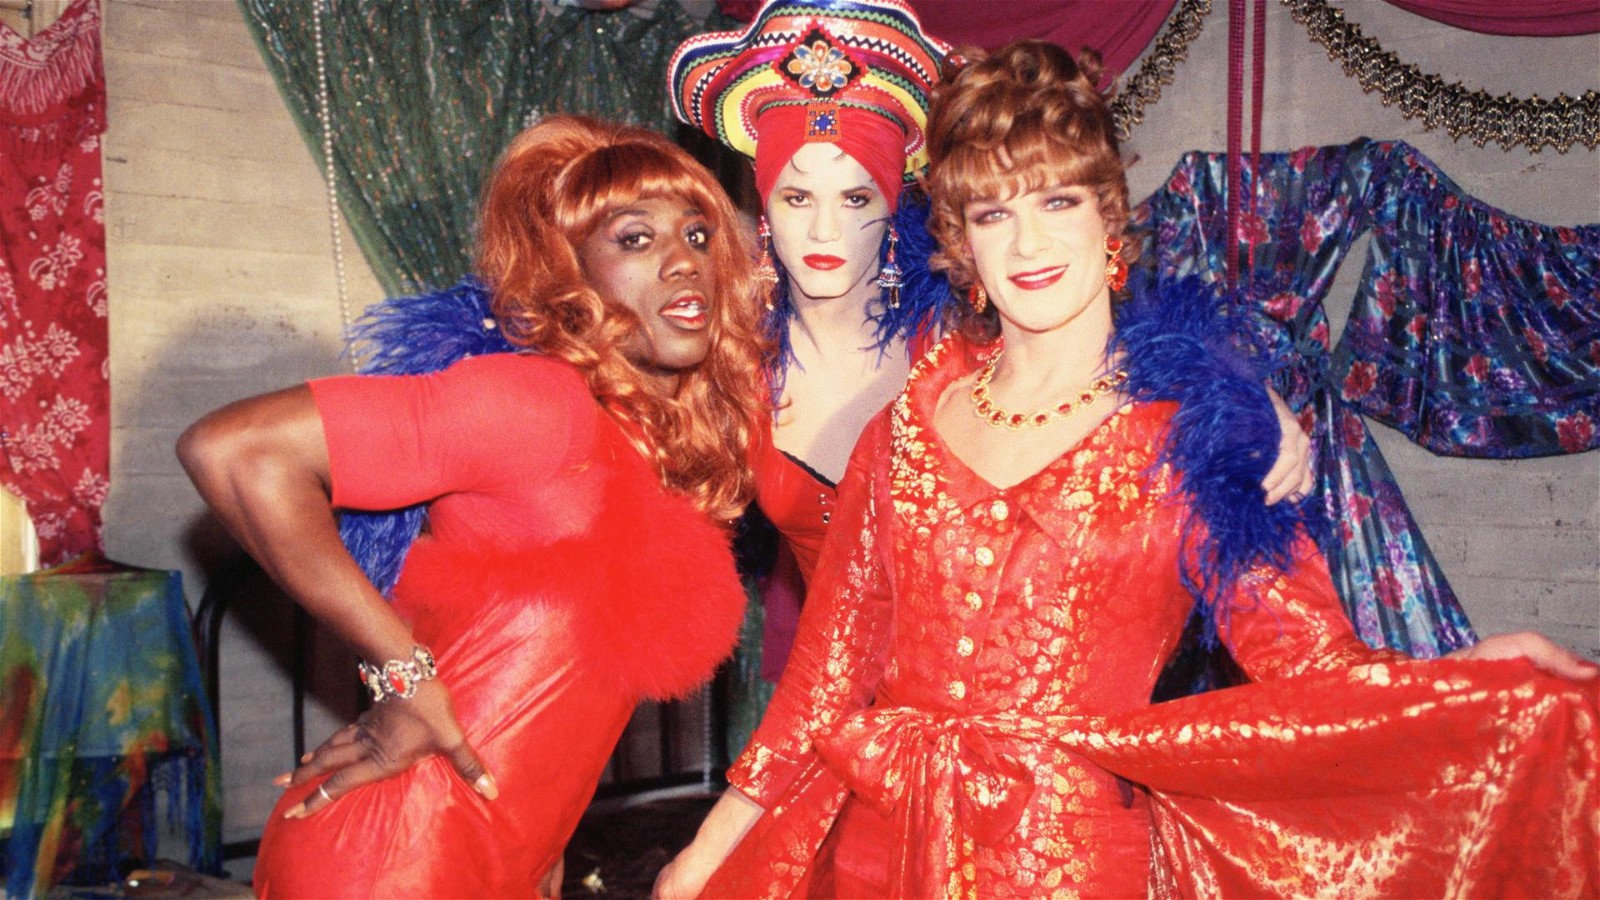 Wesley Snipes, John Leguizamo, and Patrick Swayze in To Wong Foo, Thanks for Everything! Julie Newmar